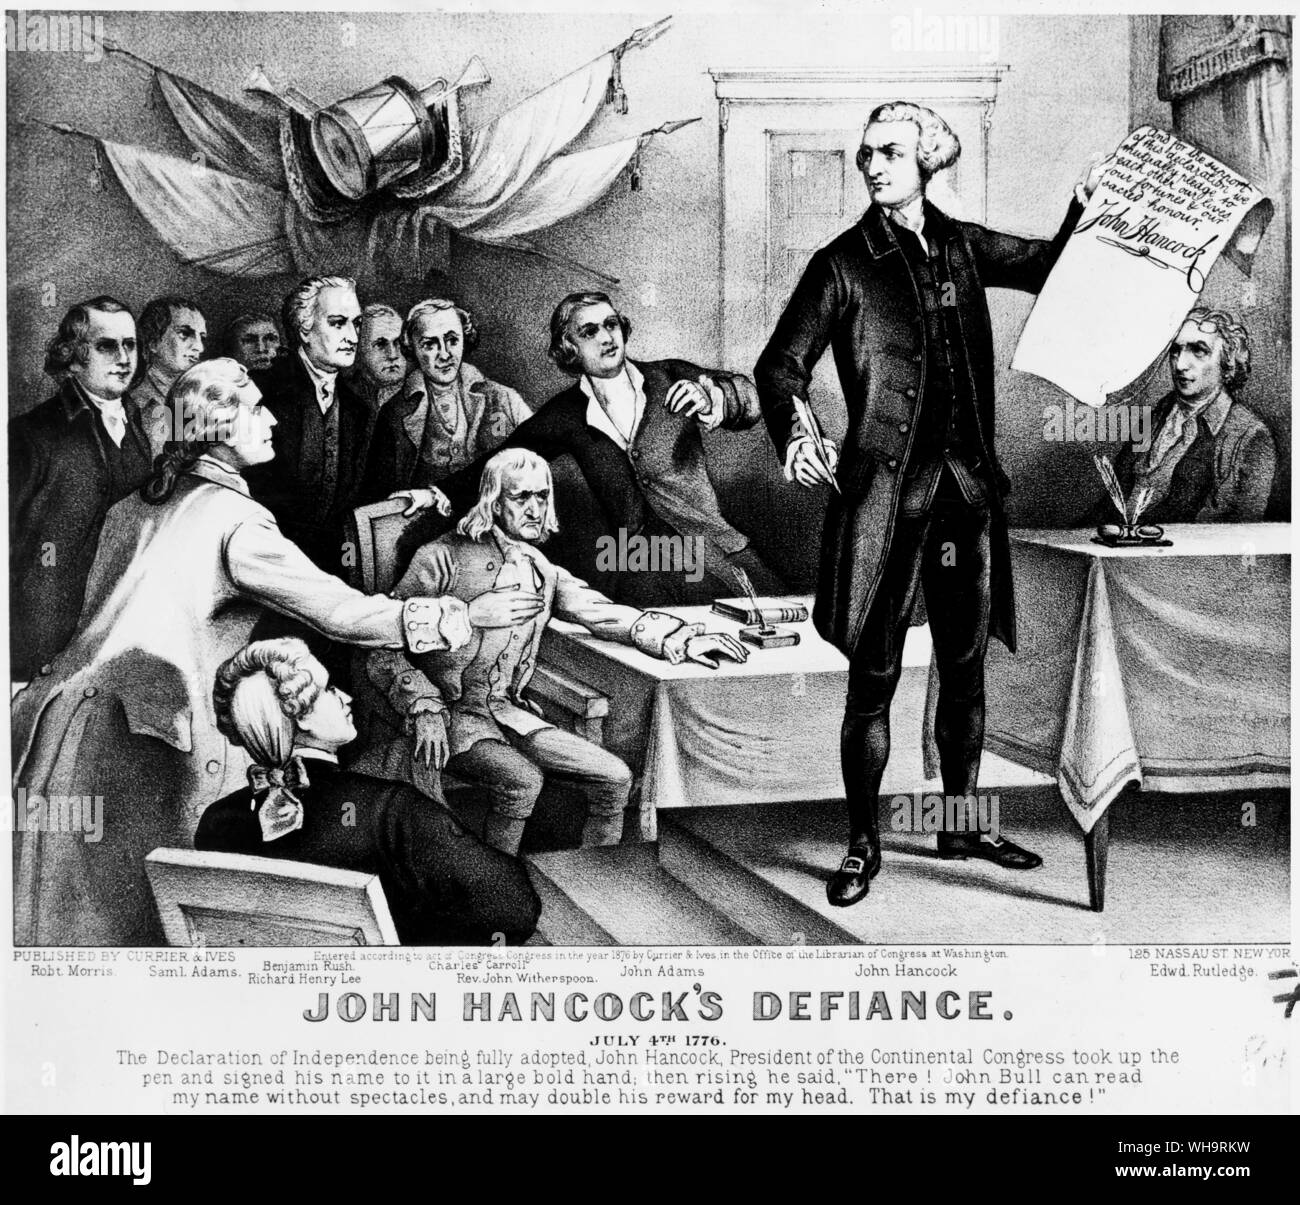 USA: 'John Hancock's Defiance', July 4th 1776. The Declaration of Independence being fully adopted, John Hancock the President of teh Continental Congress took up pen and signed his name to it in a large bold hand, then rising he said, There! John Bull can read my name without spectacles and may double his reward for my head. That is my defiance! Stock Photo